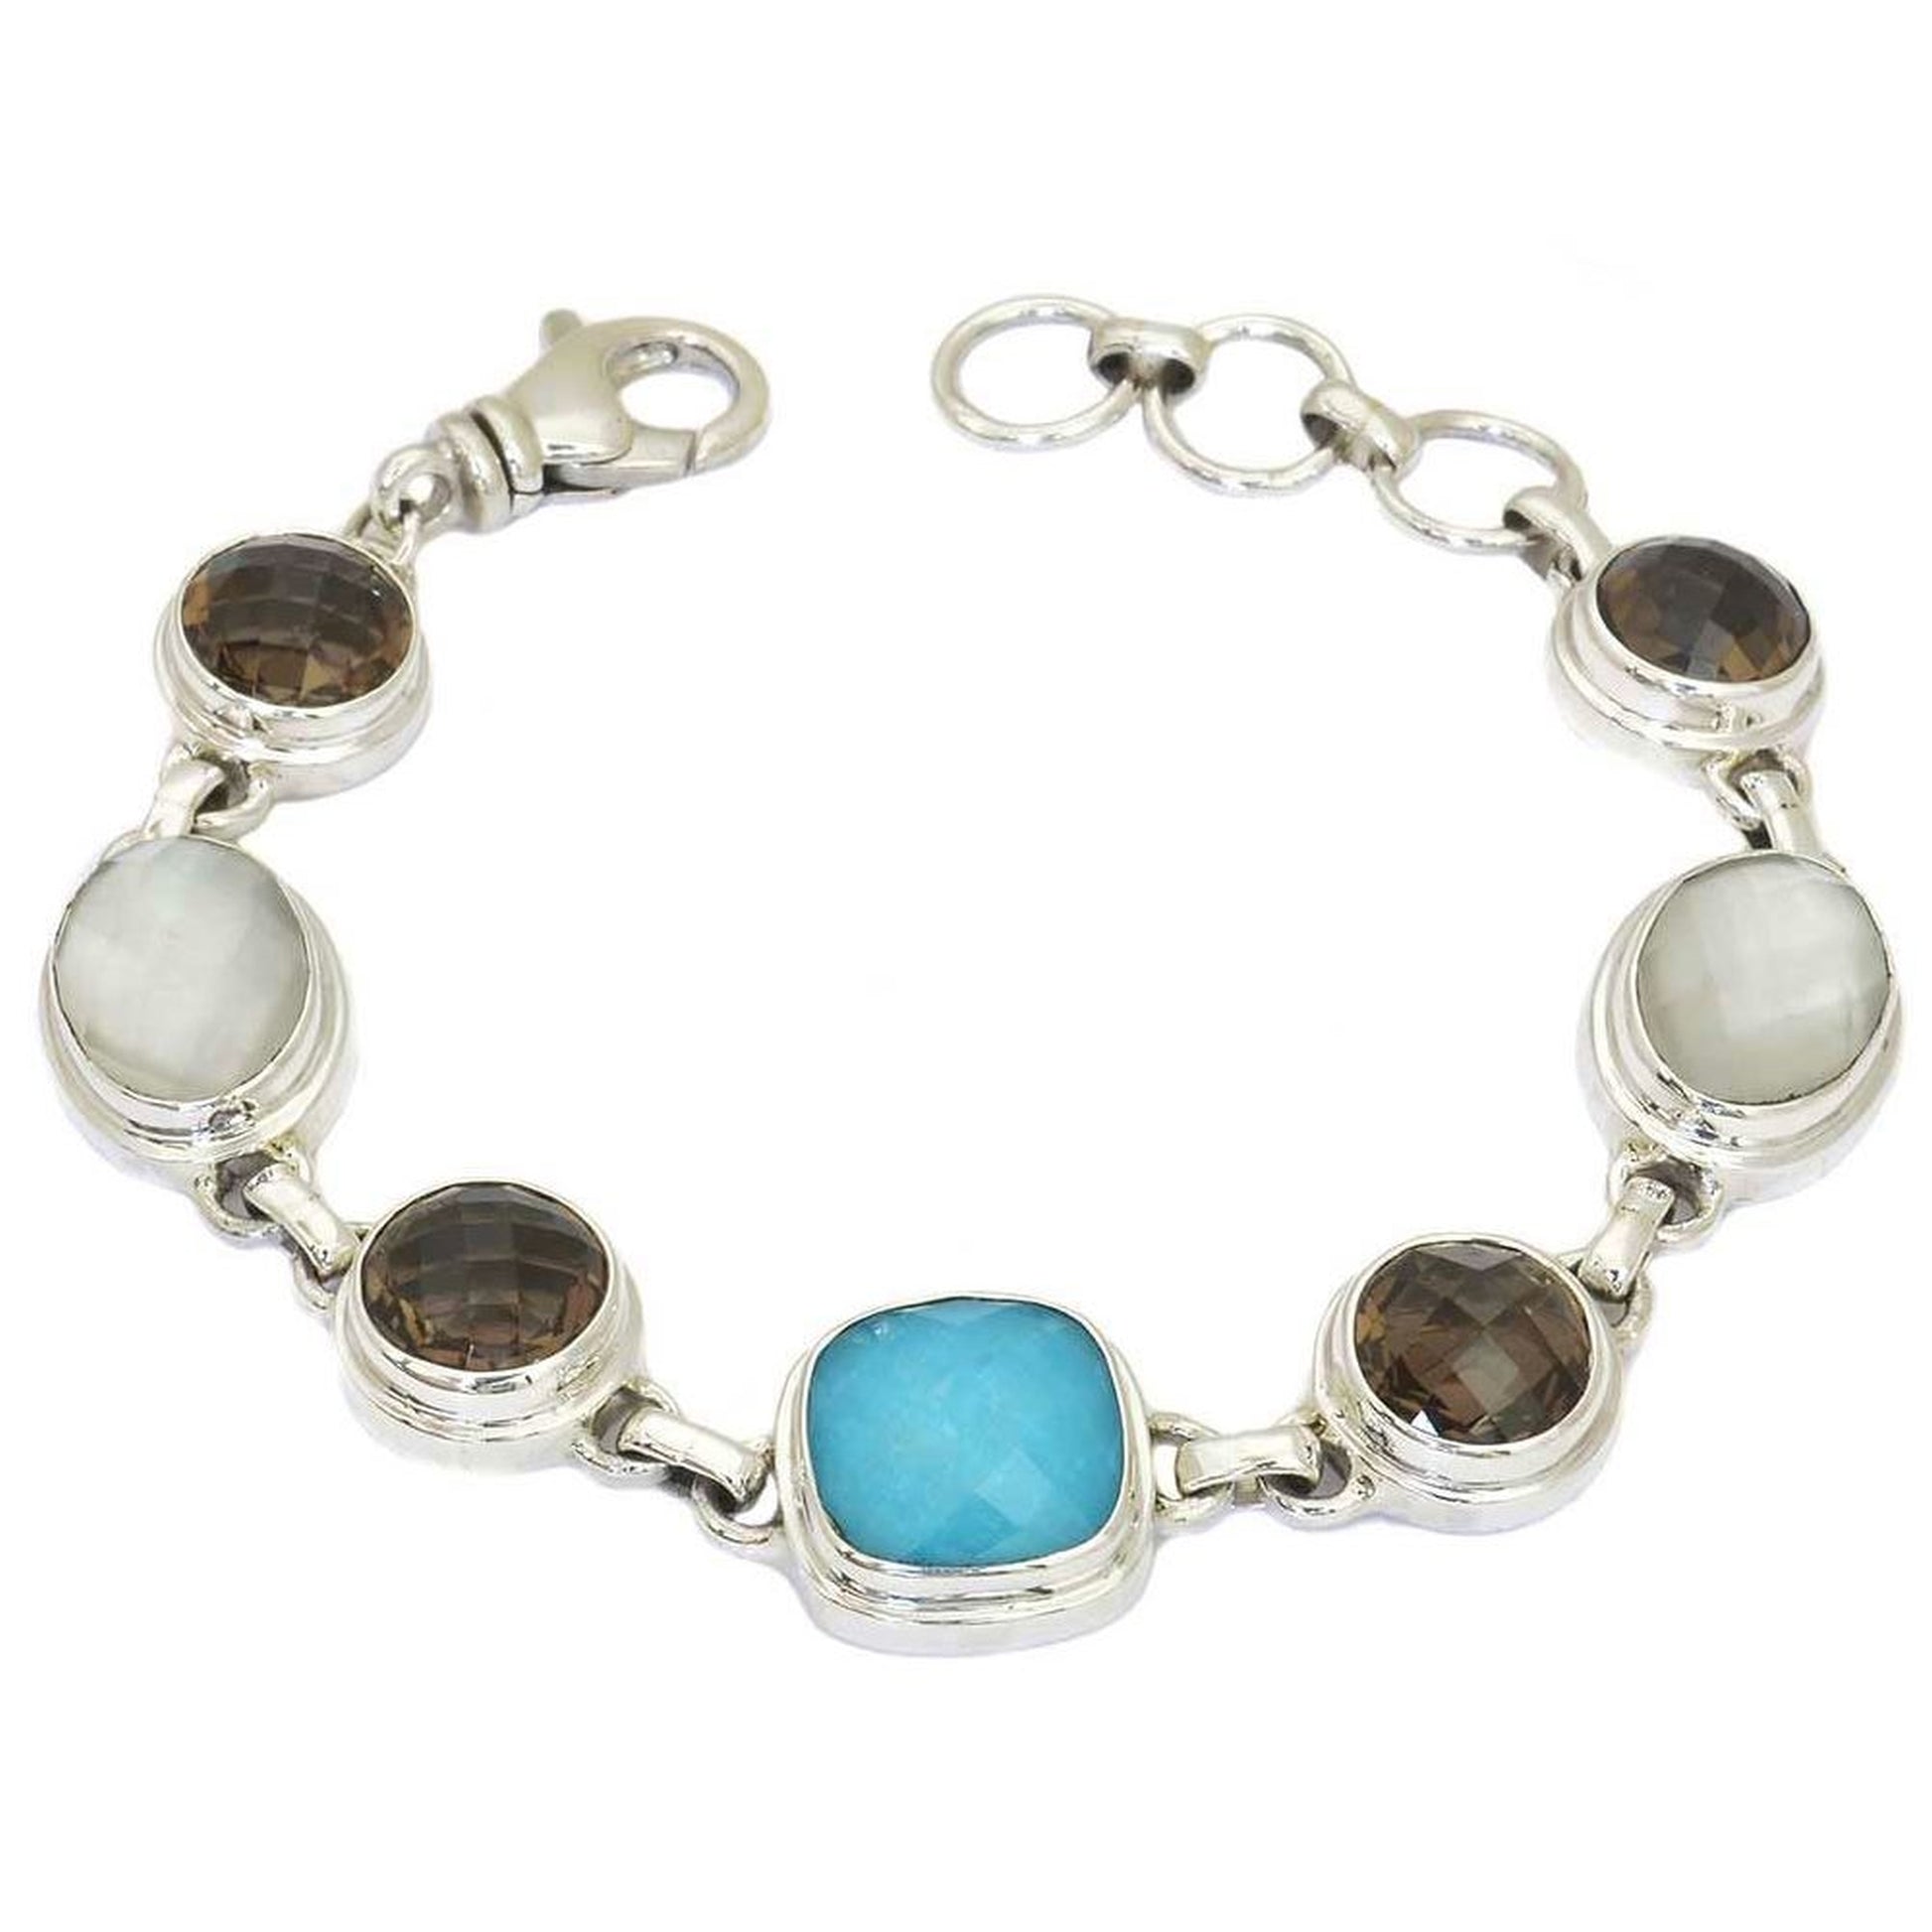 Silver link bracelet with one turquoise doublet, four round smoky topaz gemstones and two oval mother of pearl doublet gemstones.